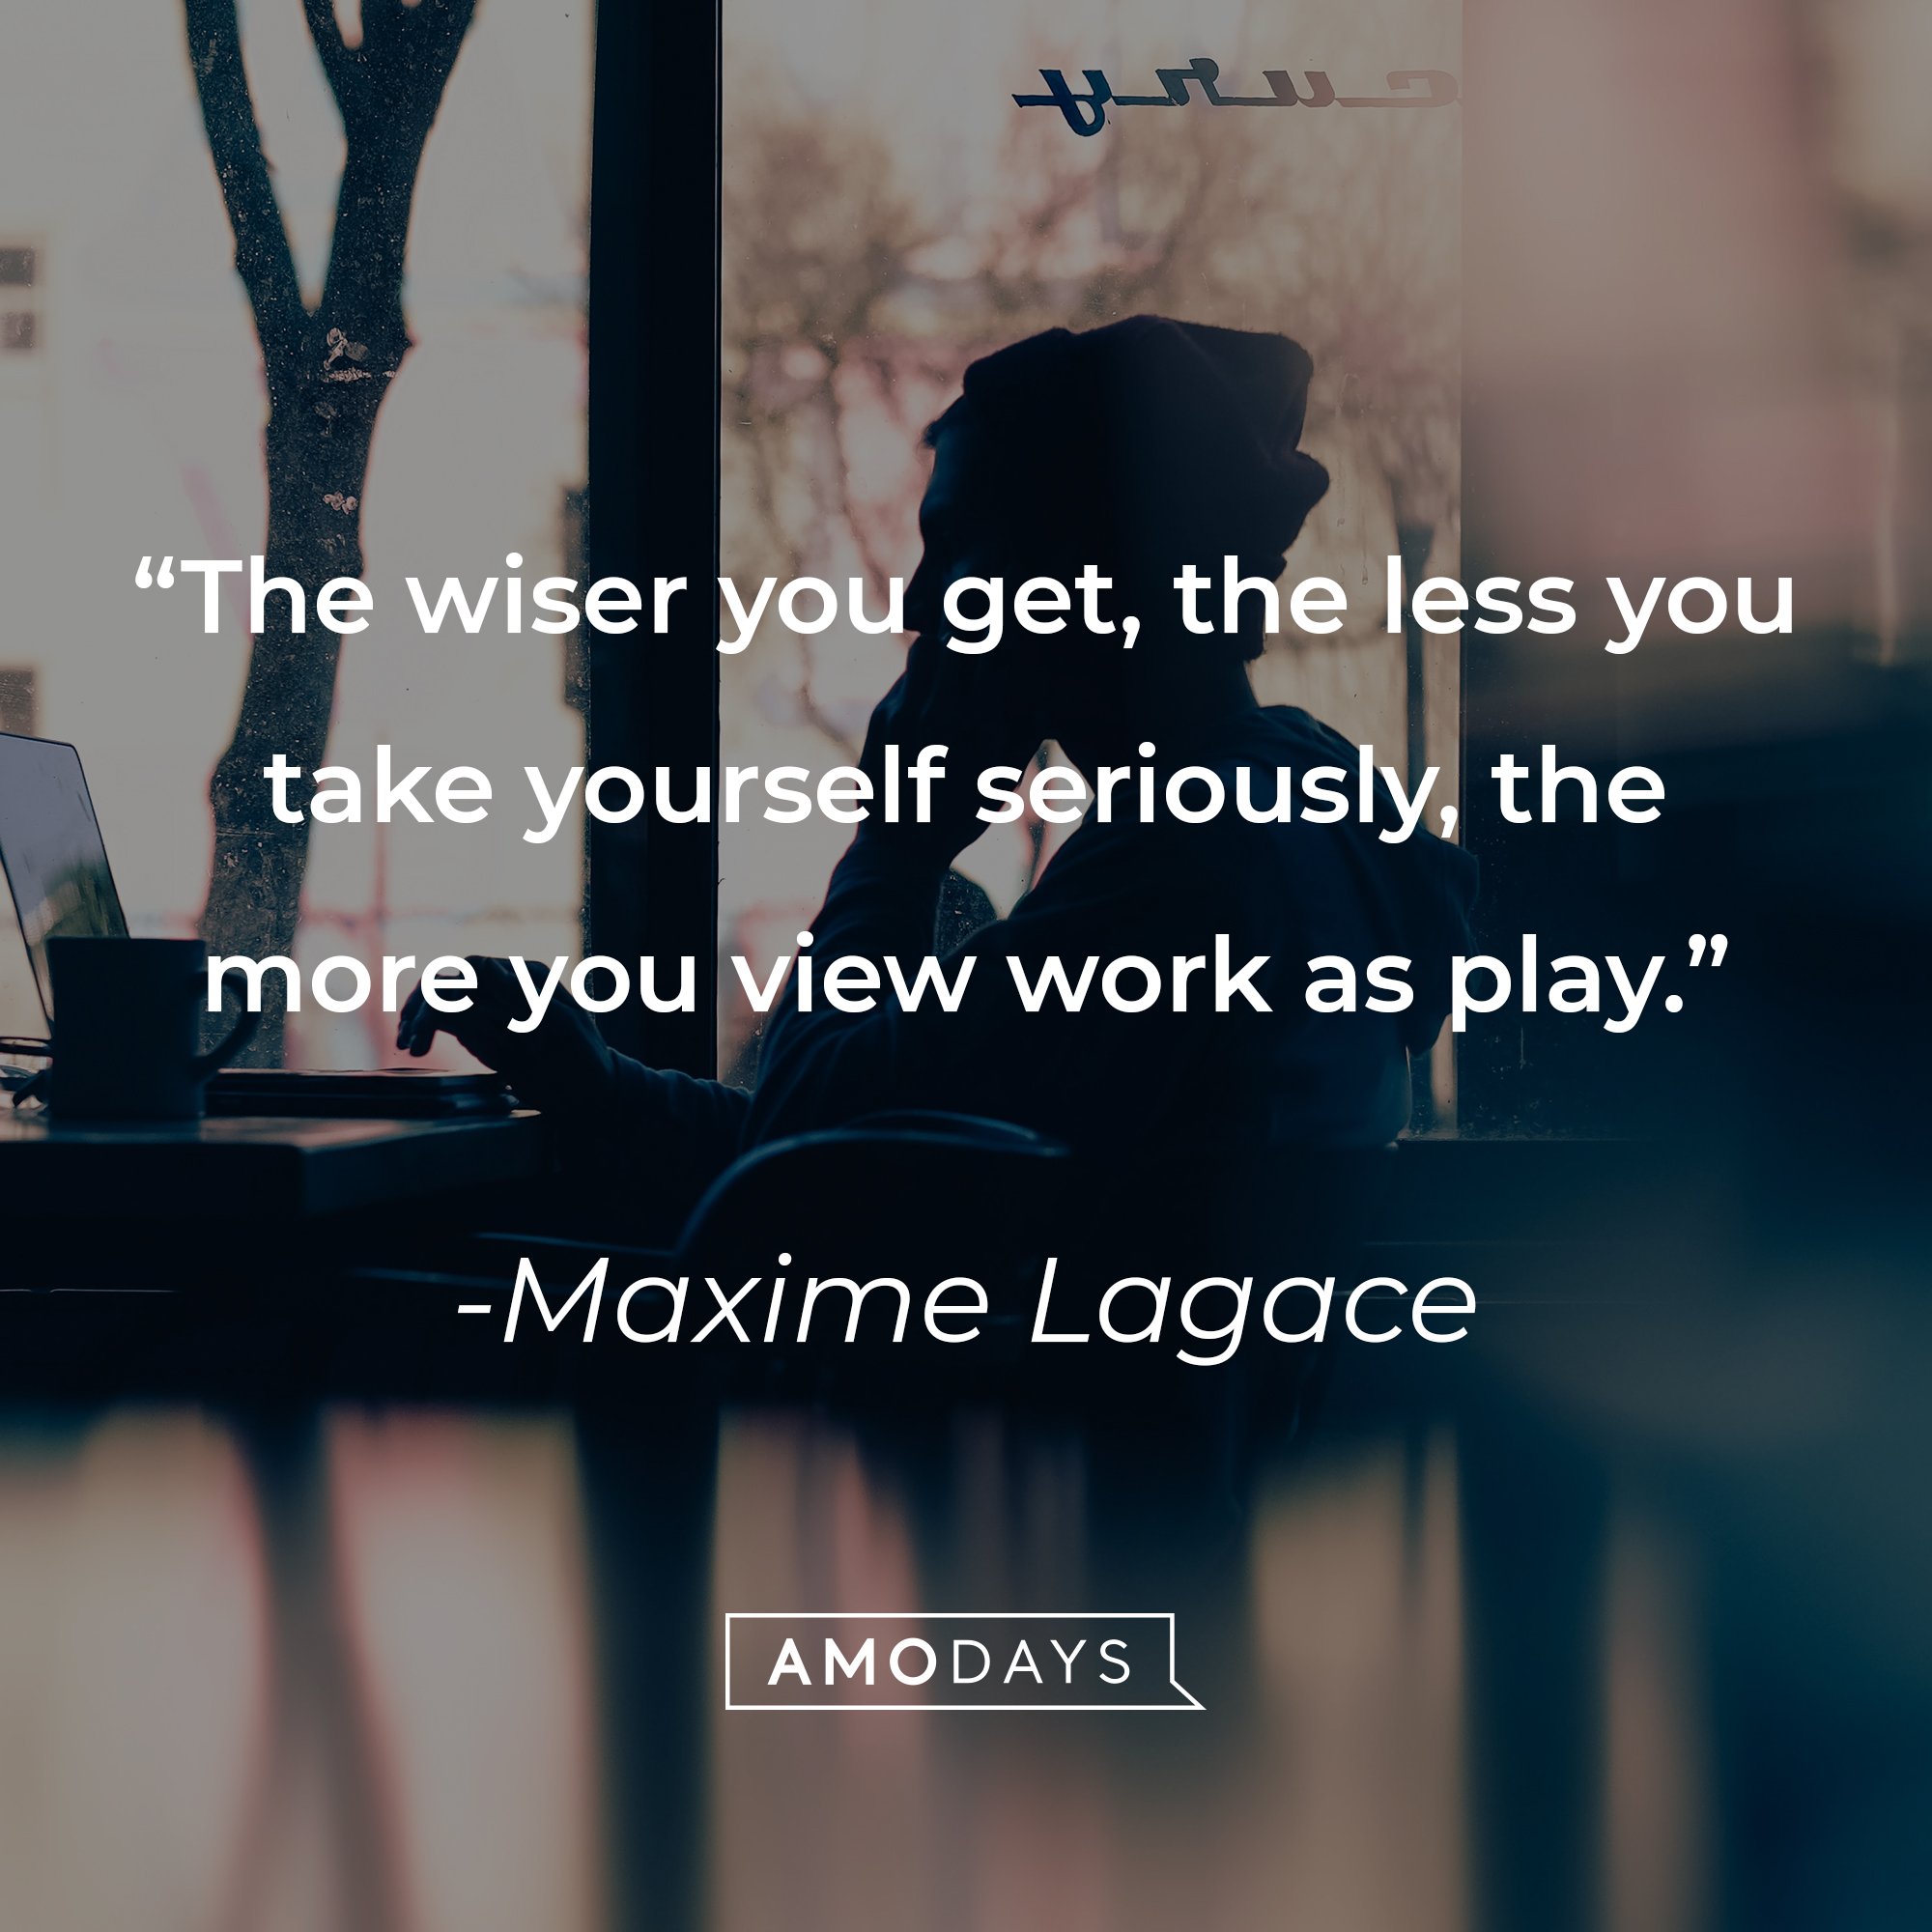 Maxime Lagace's quote: "The wiser you get, the less you take yourself seriously, the more you view work as play." | Image: AmoDays